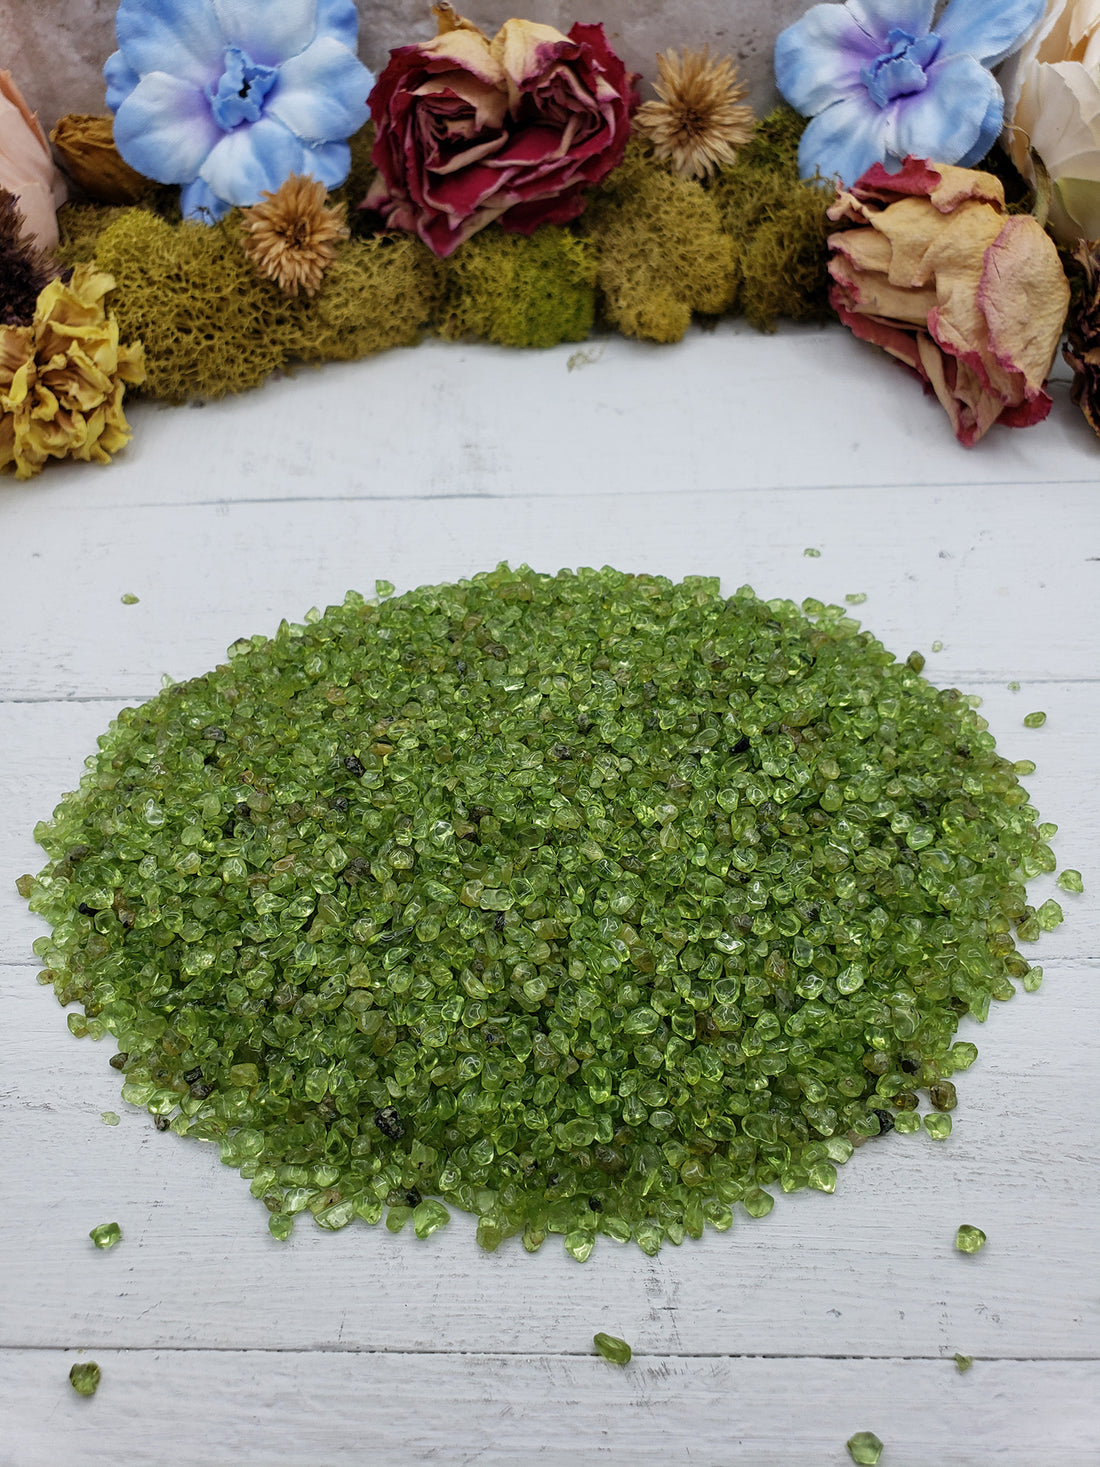 eight ounces of peridot stone chips